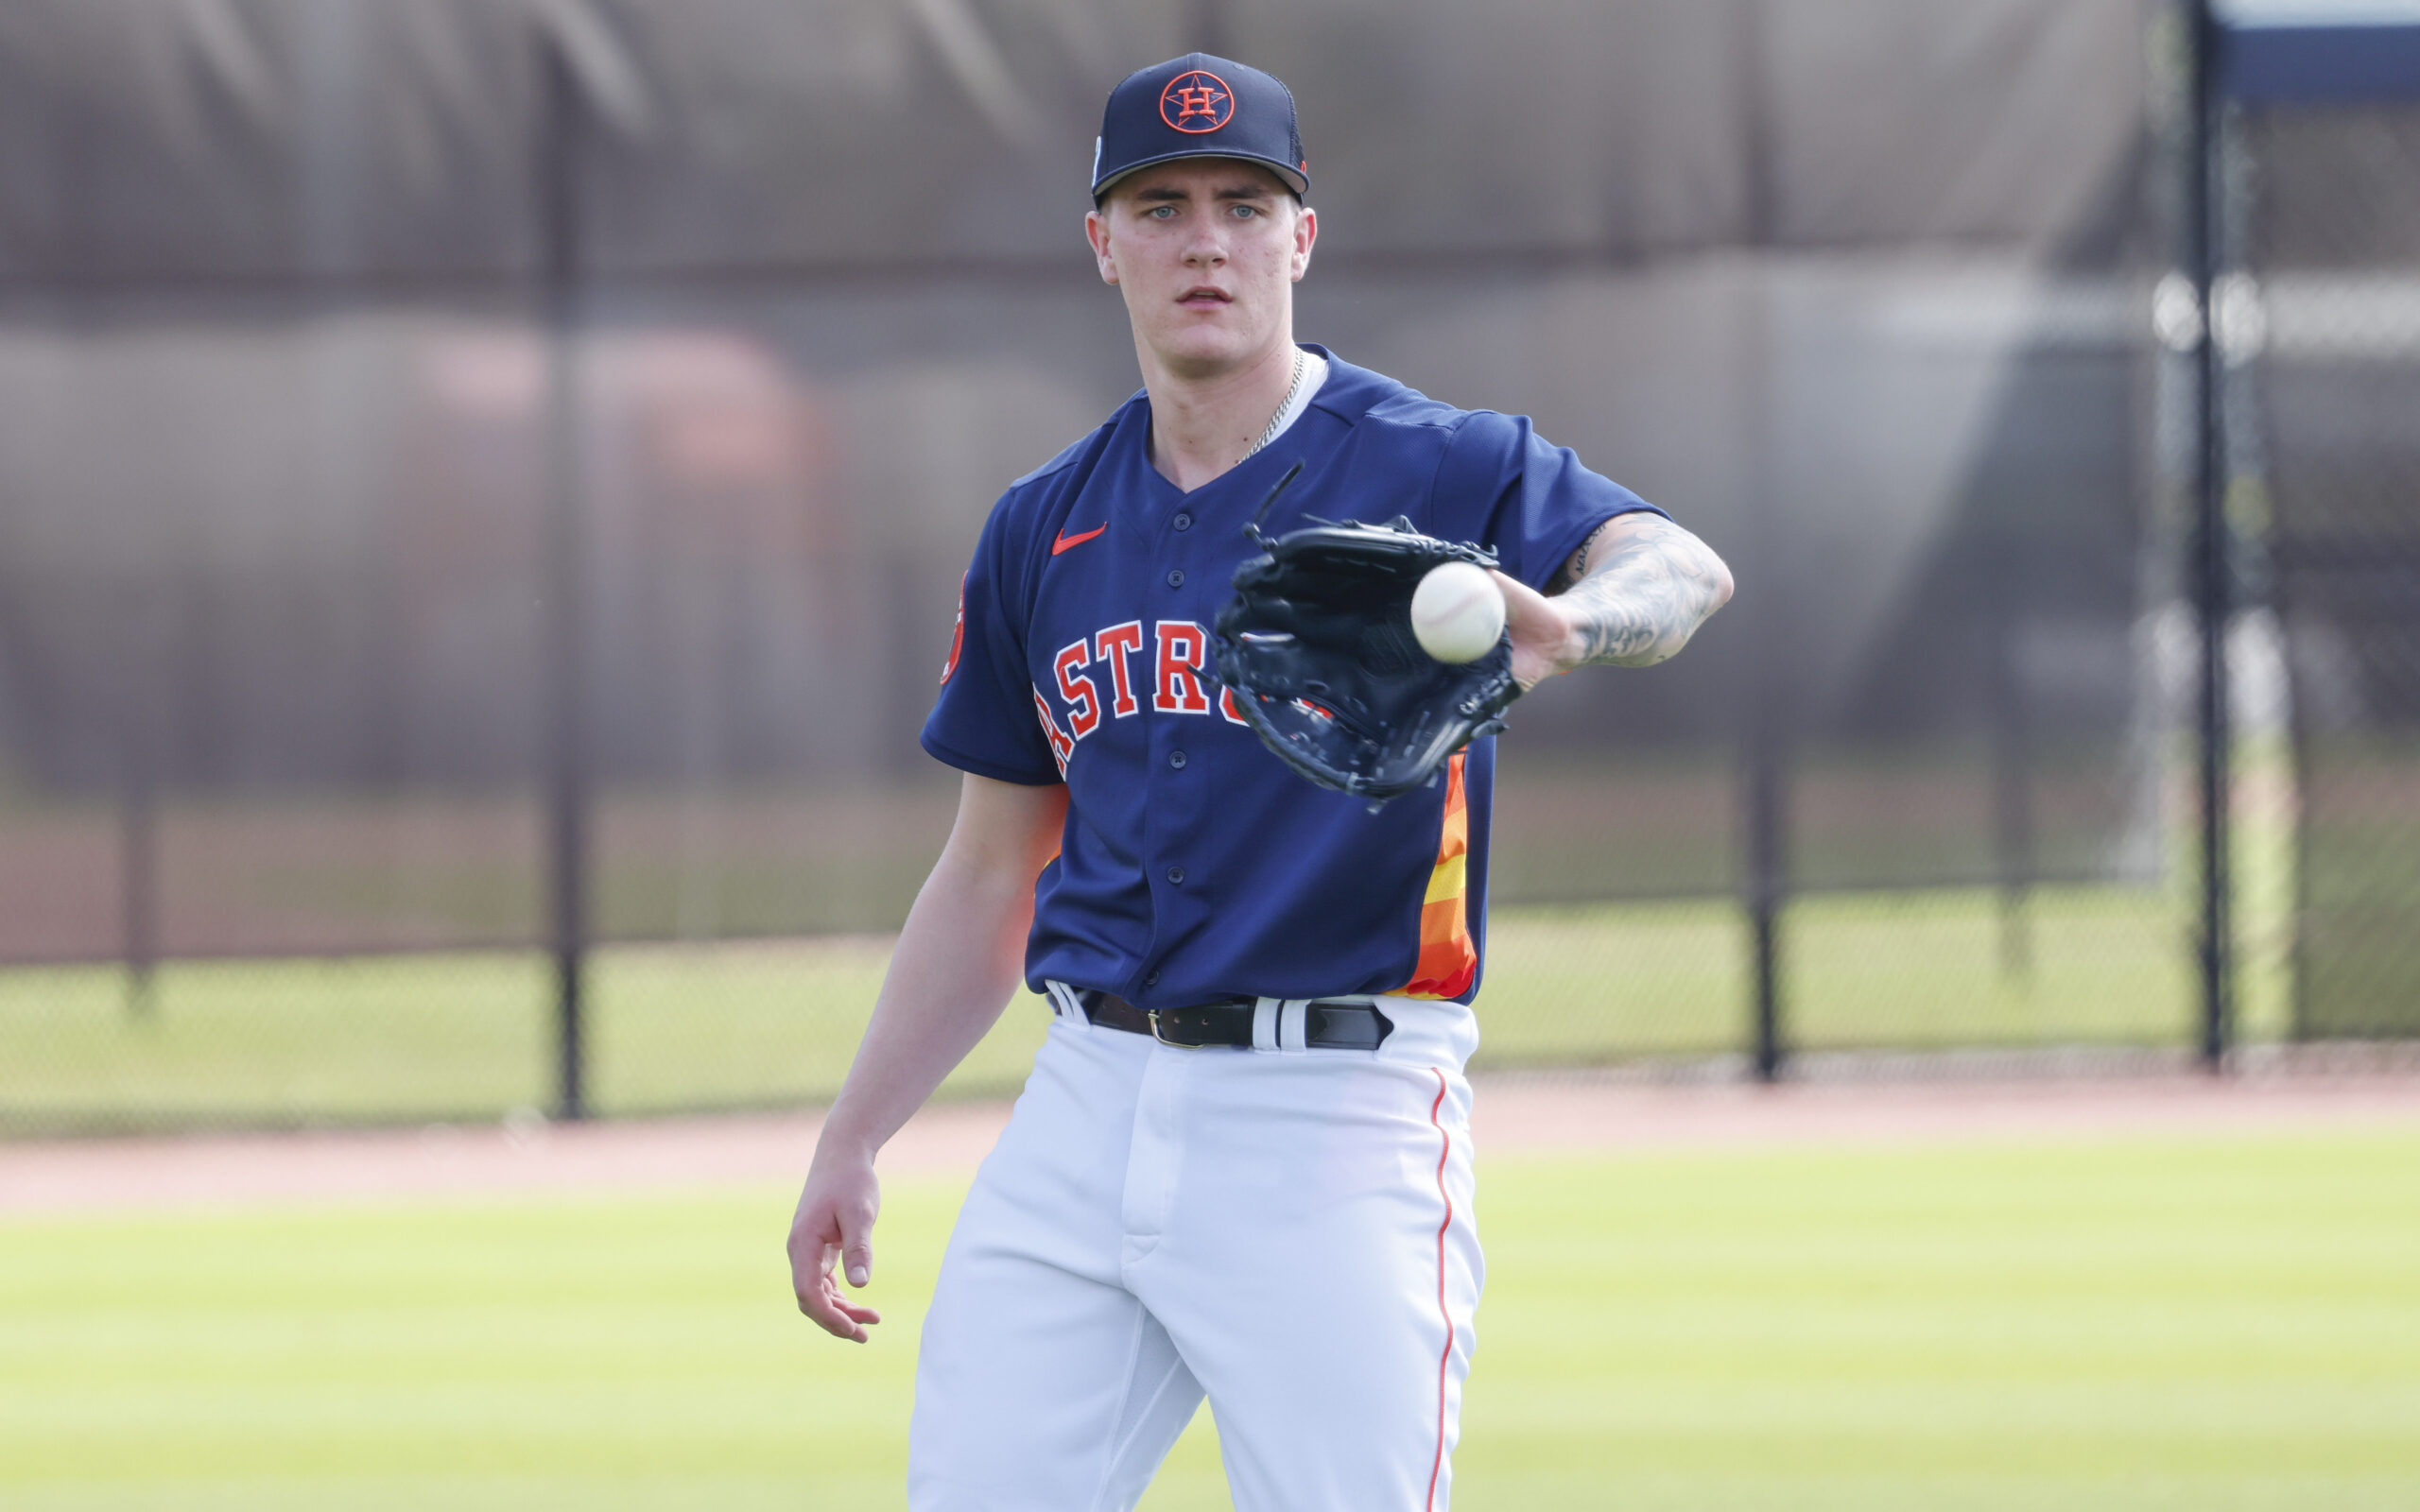 Feb 16, 2023; West Palm Beach, FL, USA; Houston Astros starting pitcher Hunter Brown (58) catches a ball during the Houston Astros spring training workouts at the Ballpark of the Palm Beaches.